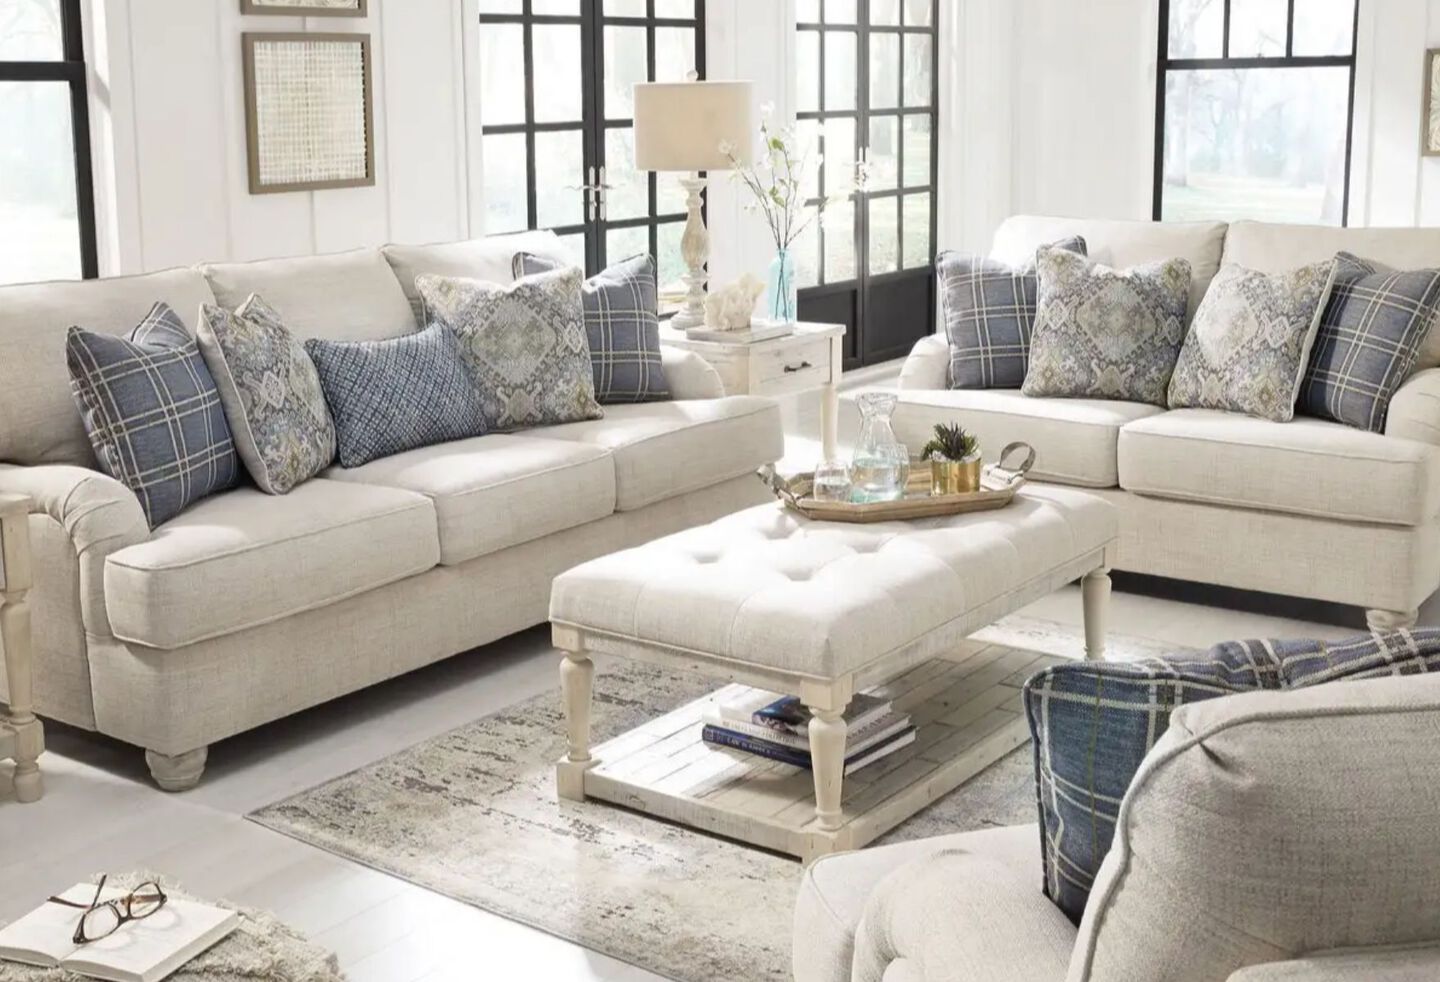 Living room with matching light grey couch, loveseat, and upholstered coffee table